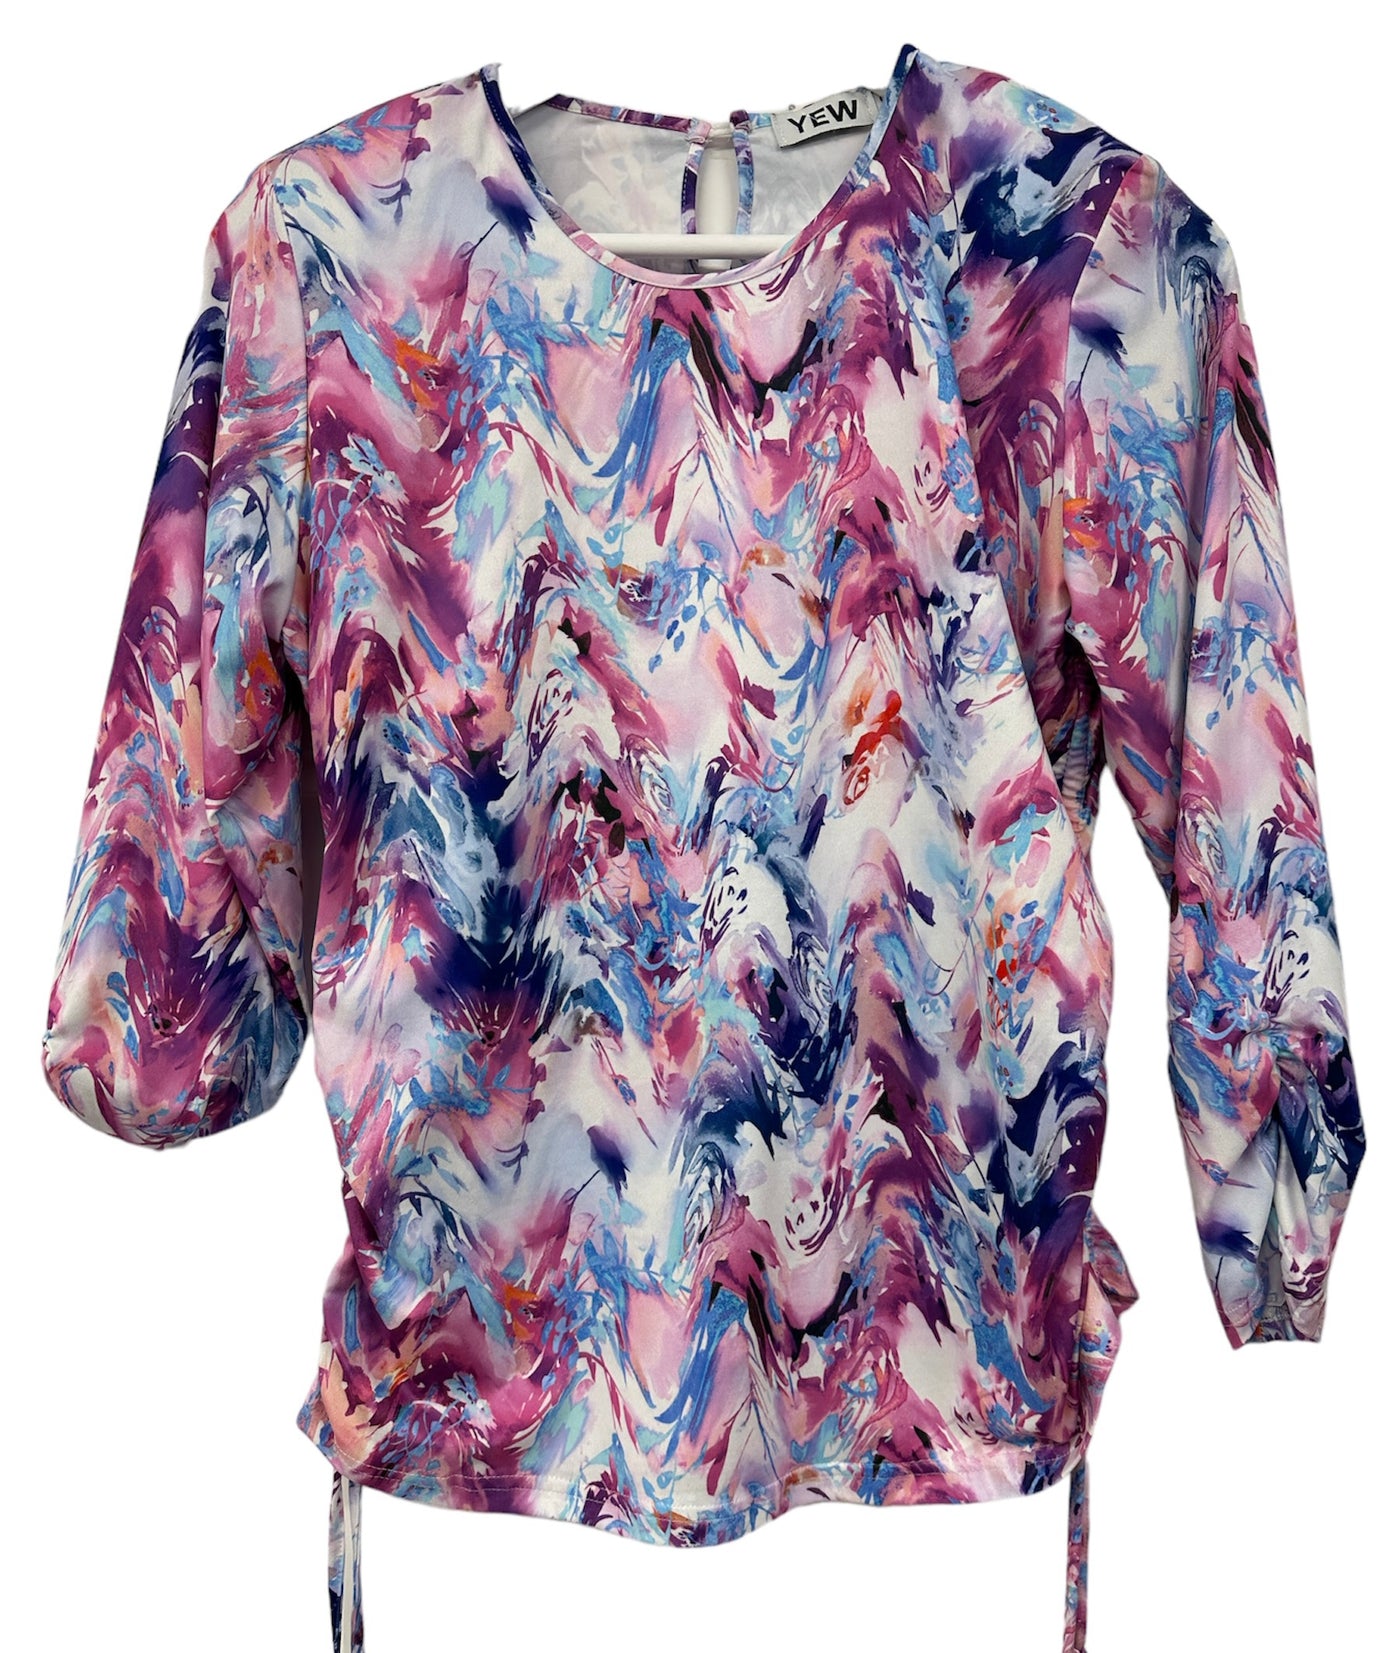 Pastel Multiprint Top with Round Neck & Ruched Sides